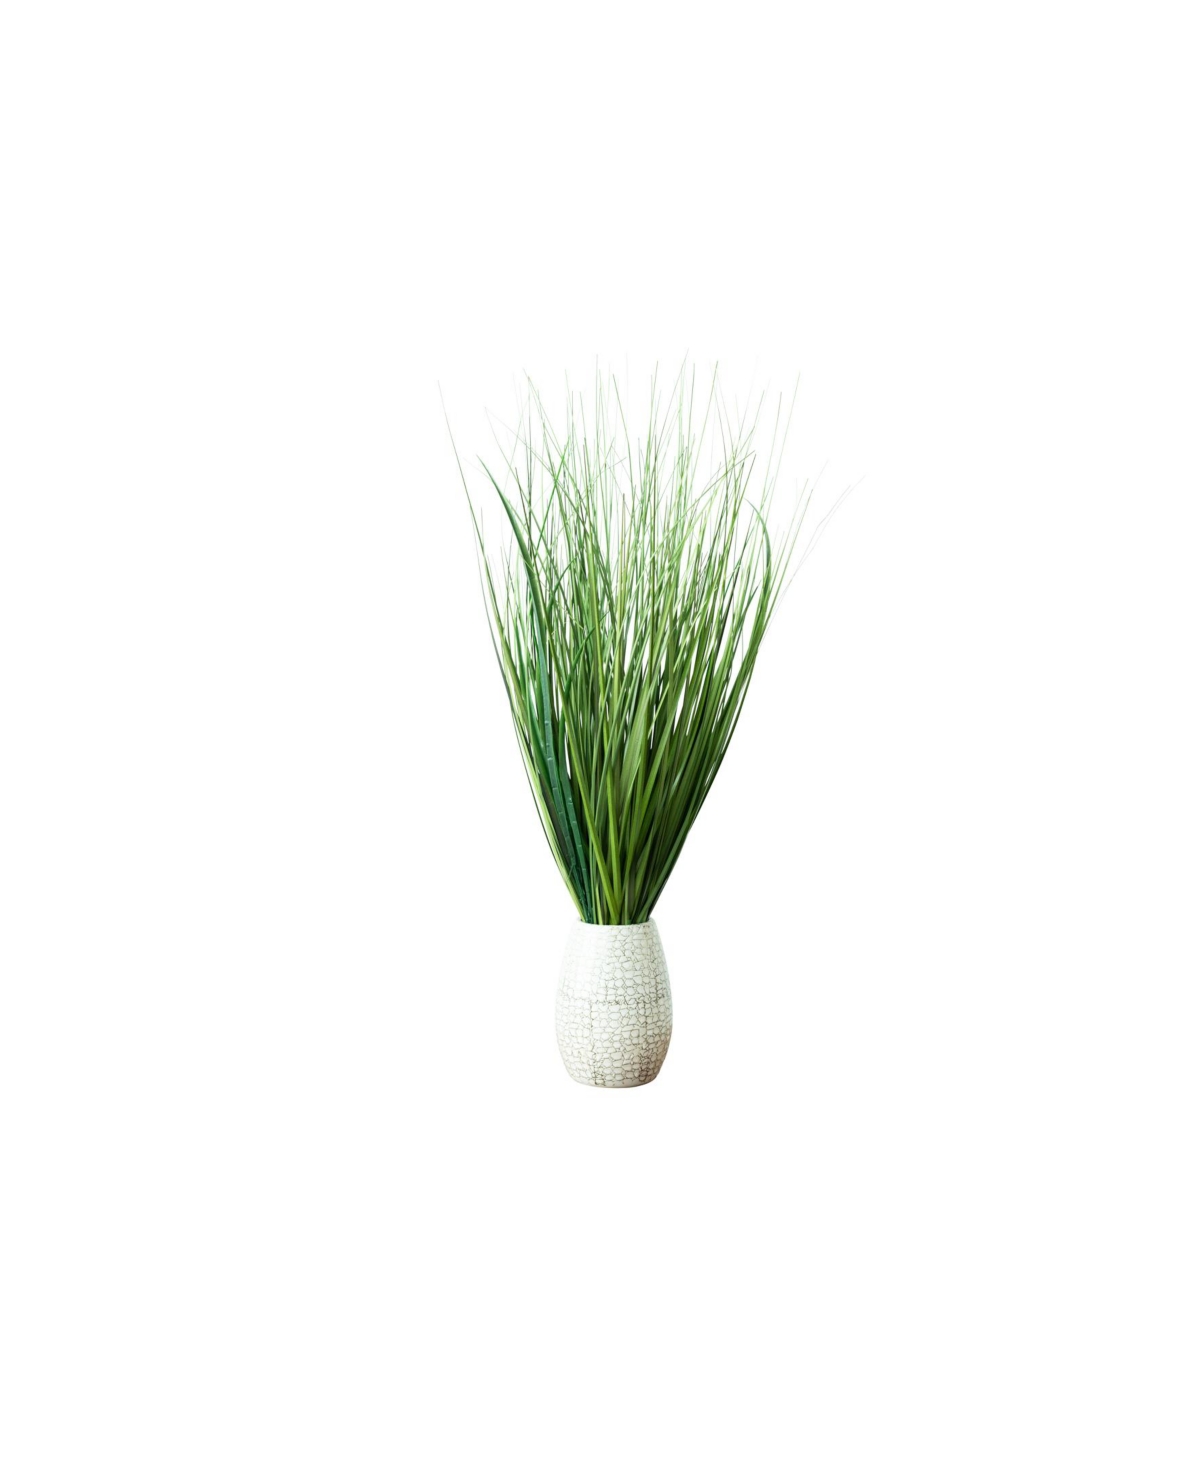 Tabletop Artificial Foliage in Crackled Pot - White